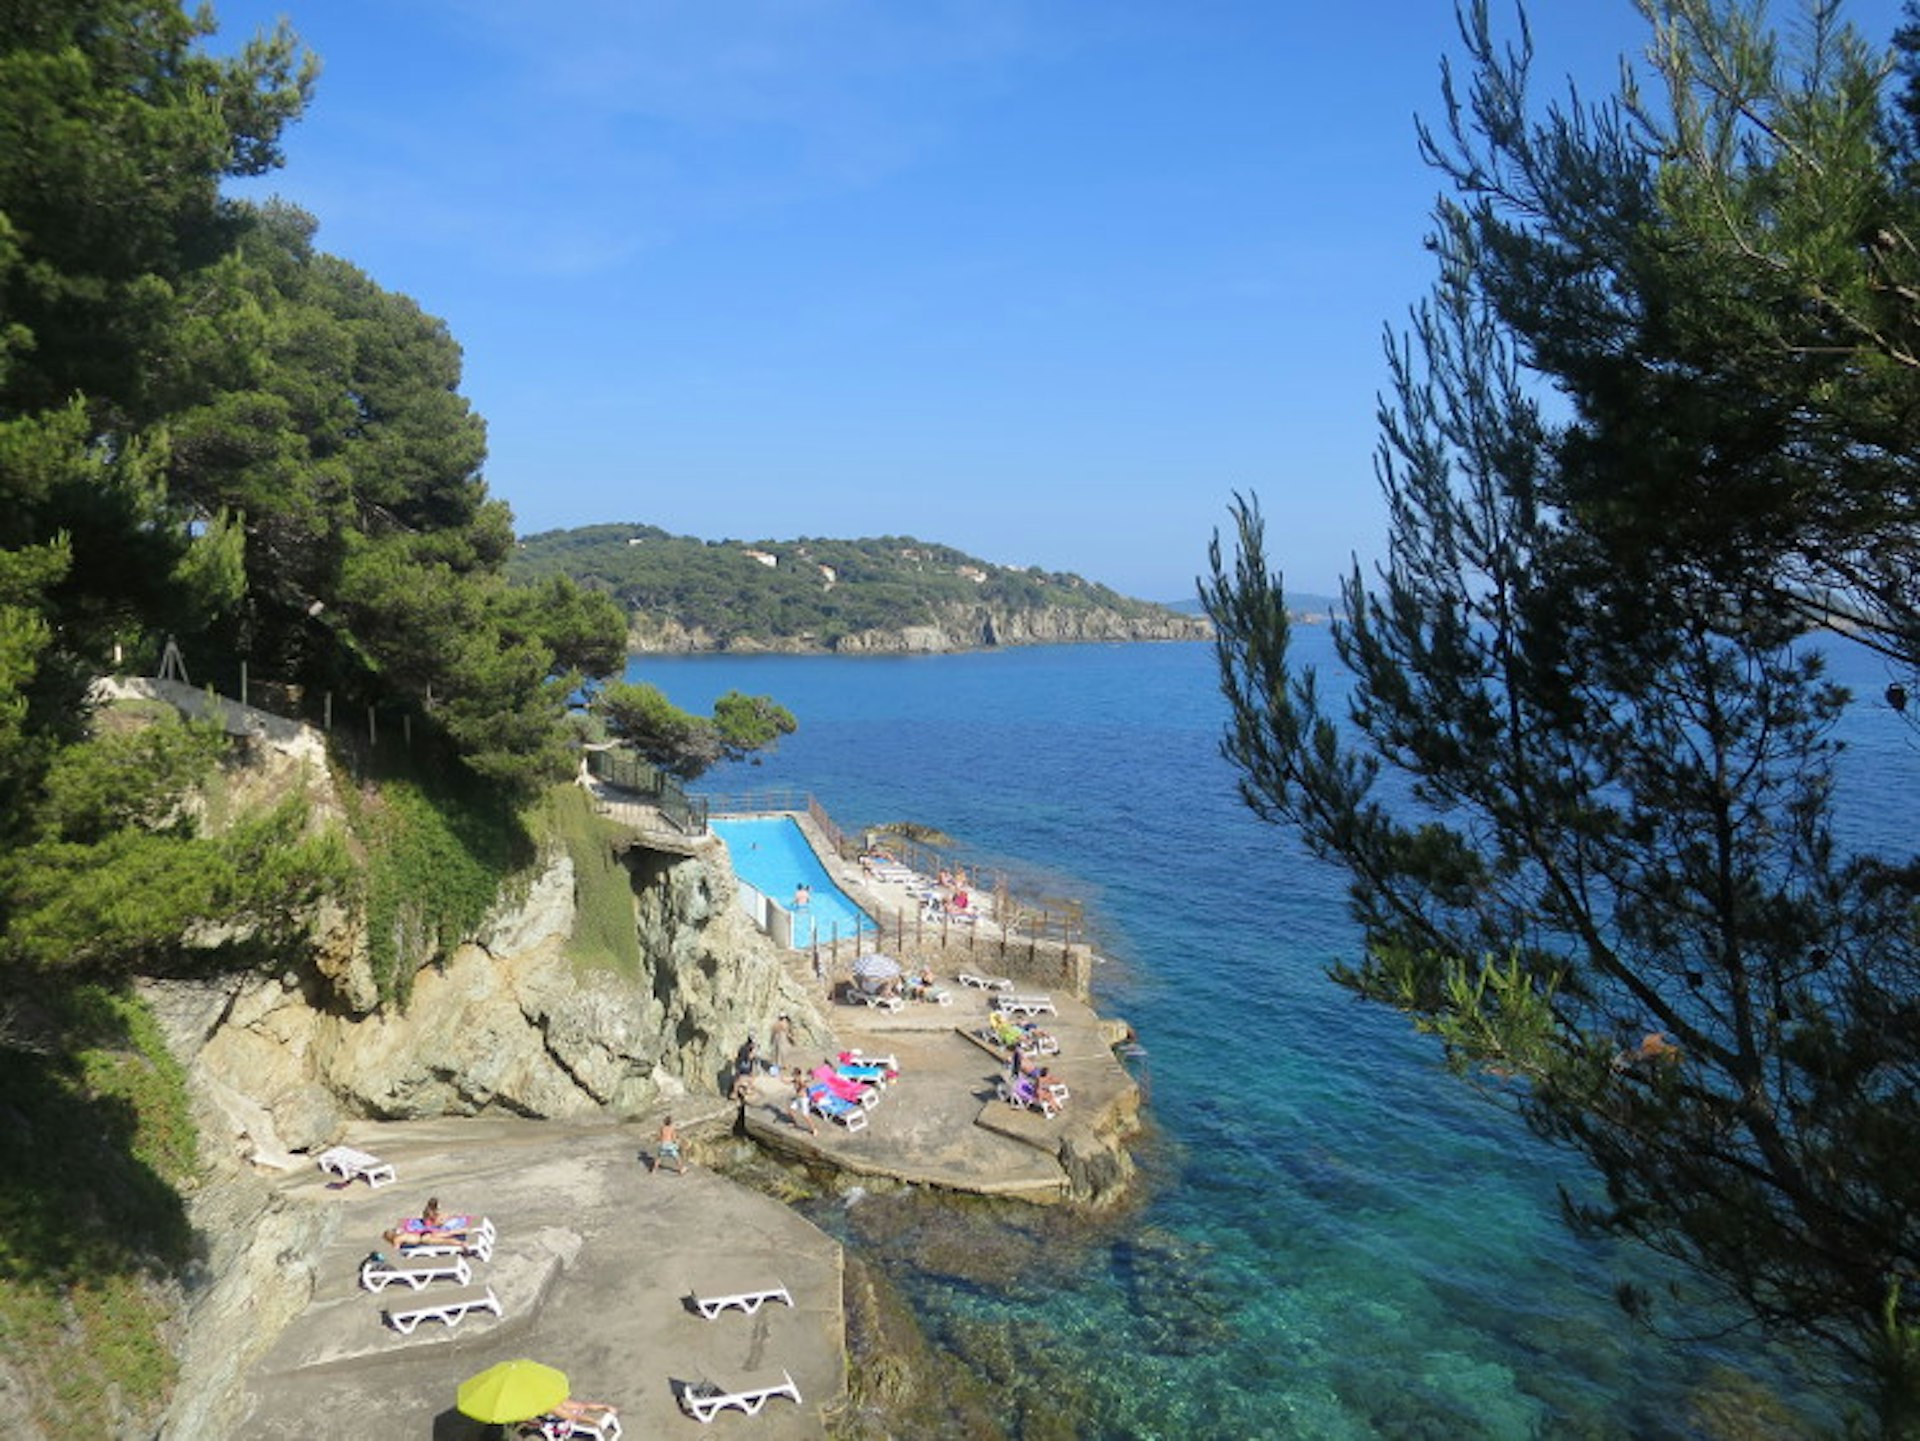 Hôtel Provençal’s outdoor swimming pool. Image by Karyn Noble/Lonely Planet